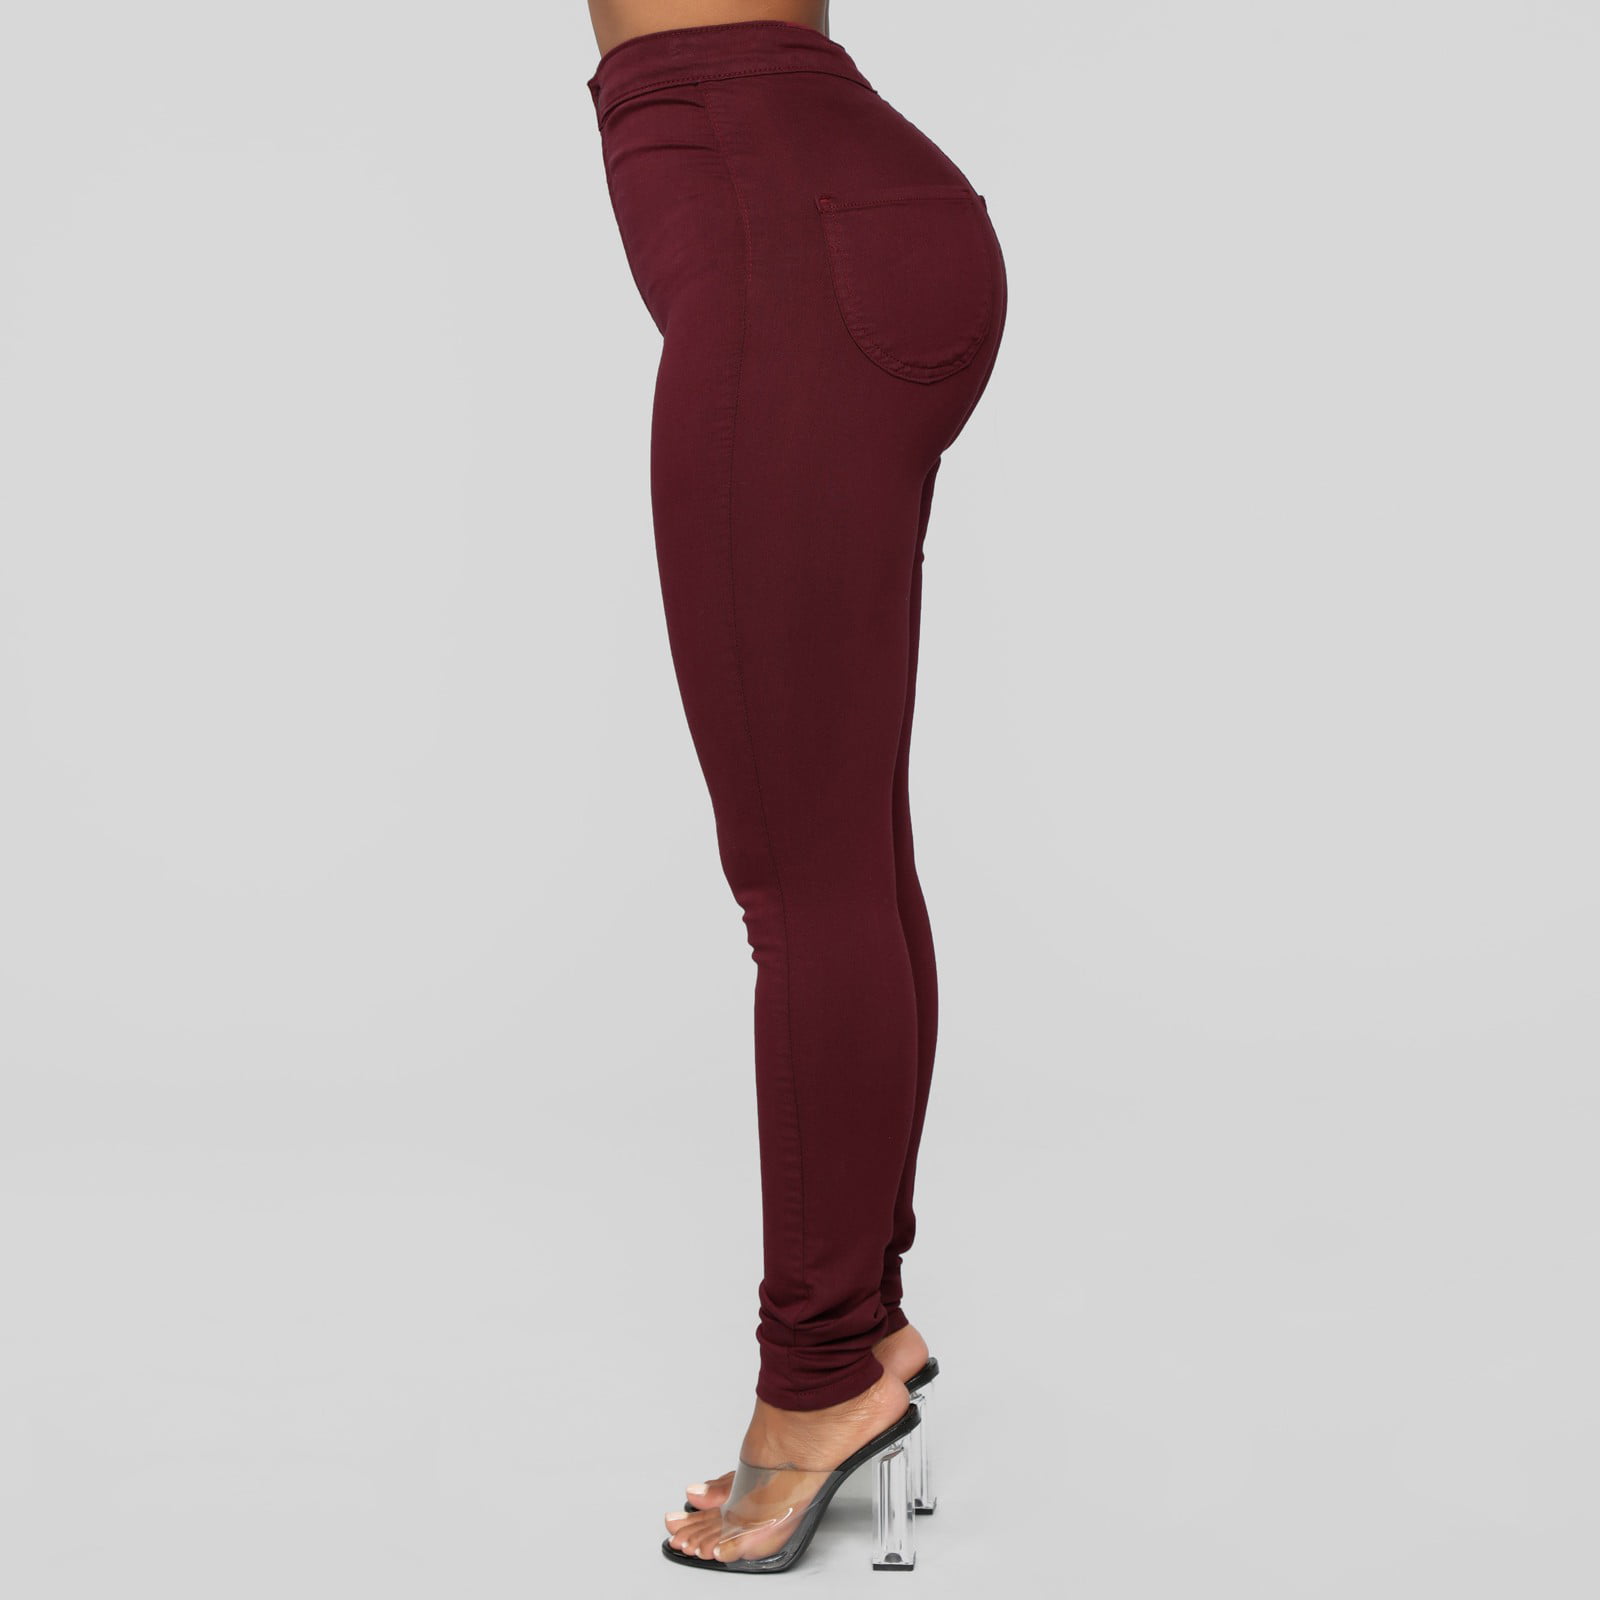 HMGYH satina high waisted leggings for women Seam Front High Waist Flare  Leg Pants (Color : Burgundy, Size : Petite XS) : Buy Online at Best Price  in KSA - Souq is